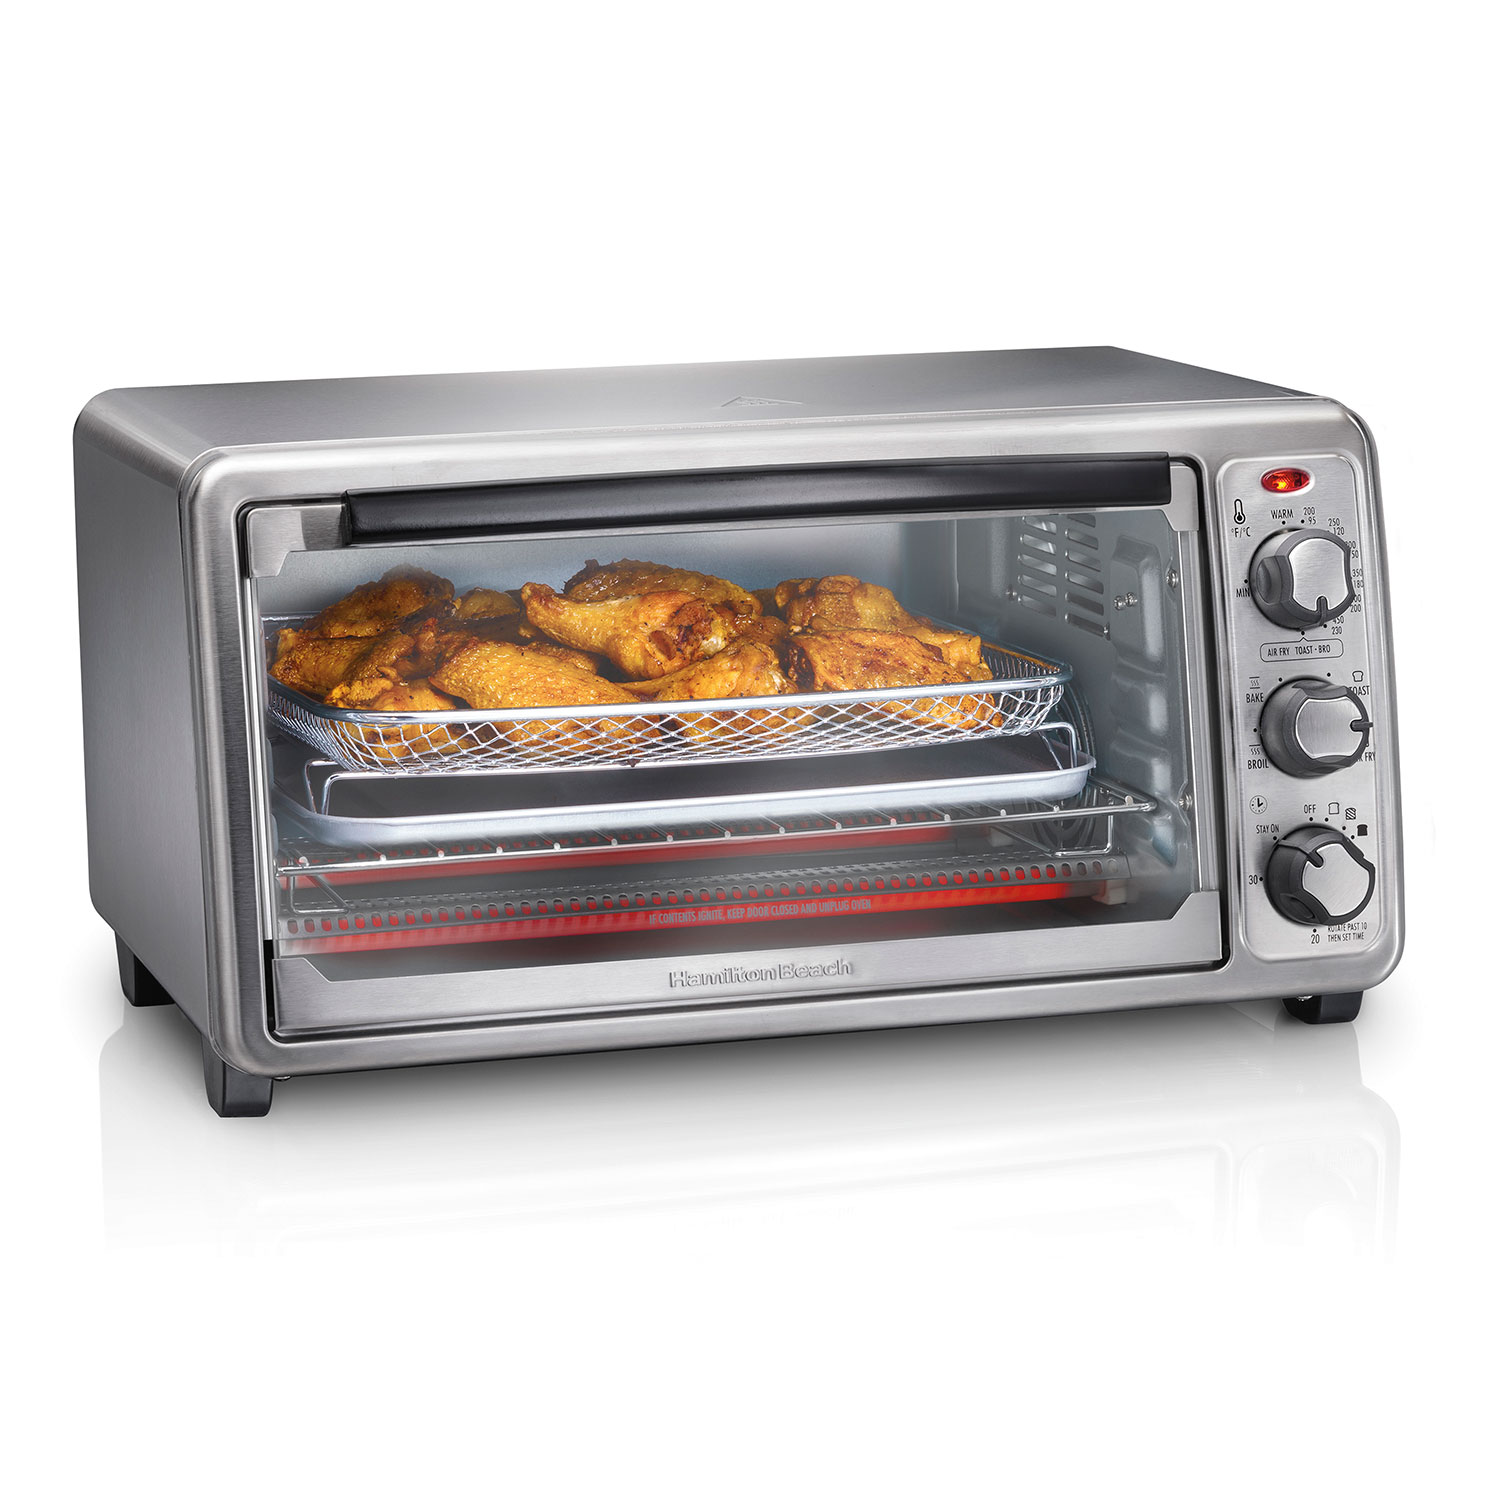 Sure-Crisp® Air Fryer Toaster Oven, Stainless Steel (31413)